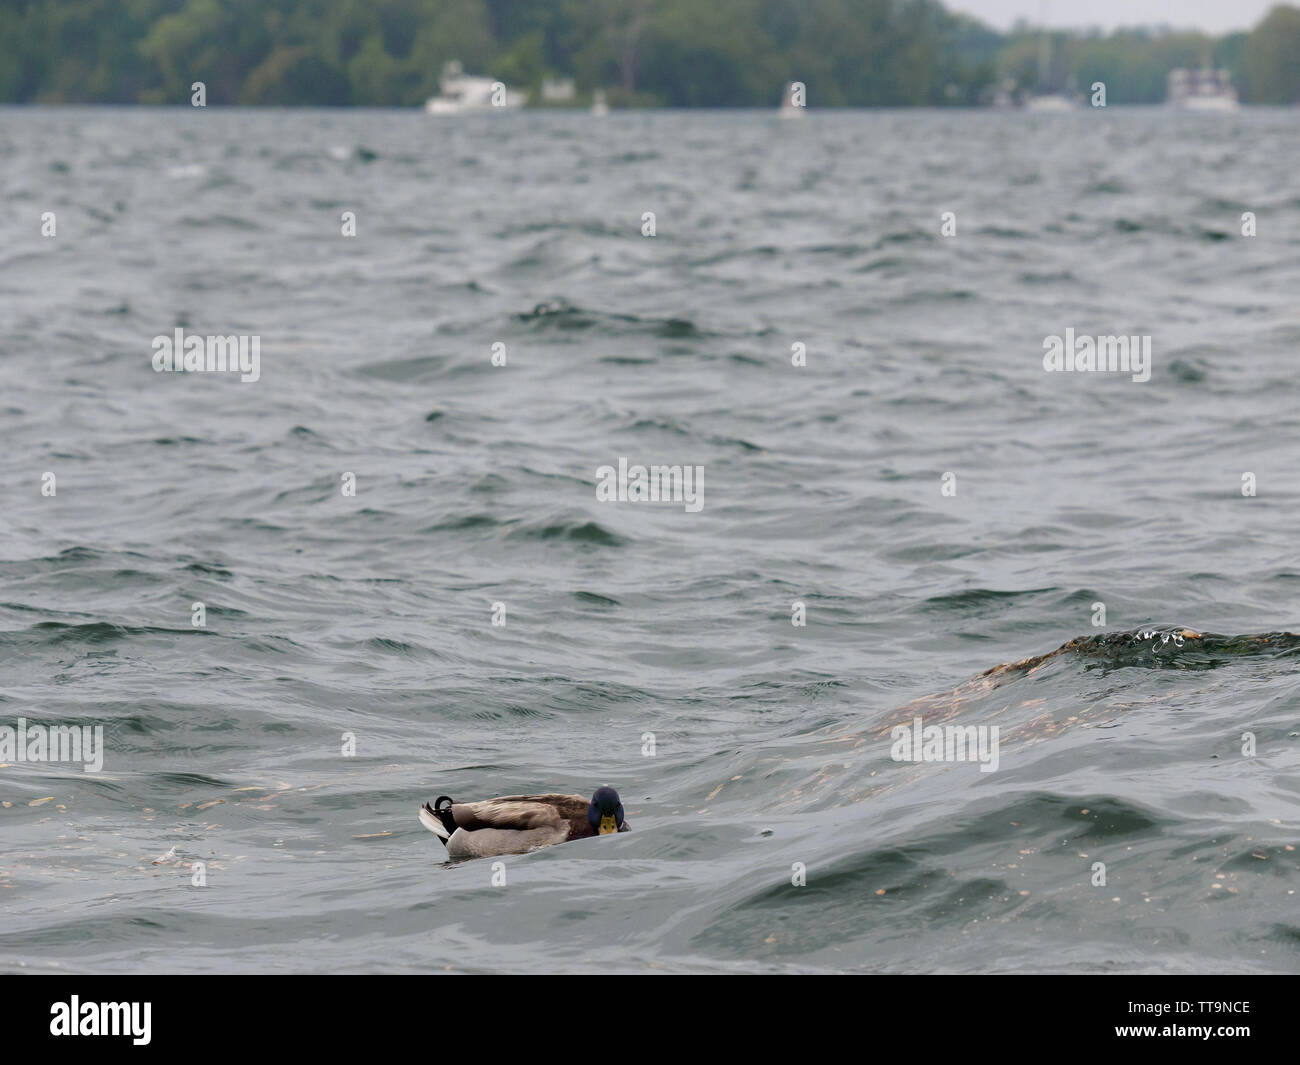 Toronto, Canada. 15th June, 2019. Male mallard with green head and brown body riding the waves in harbour. Stock Photo